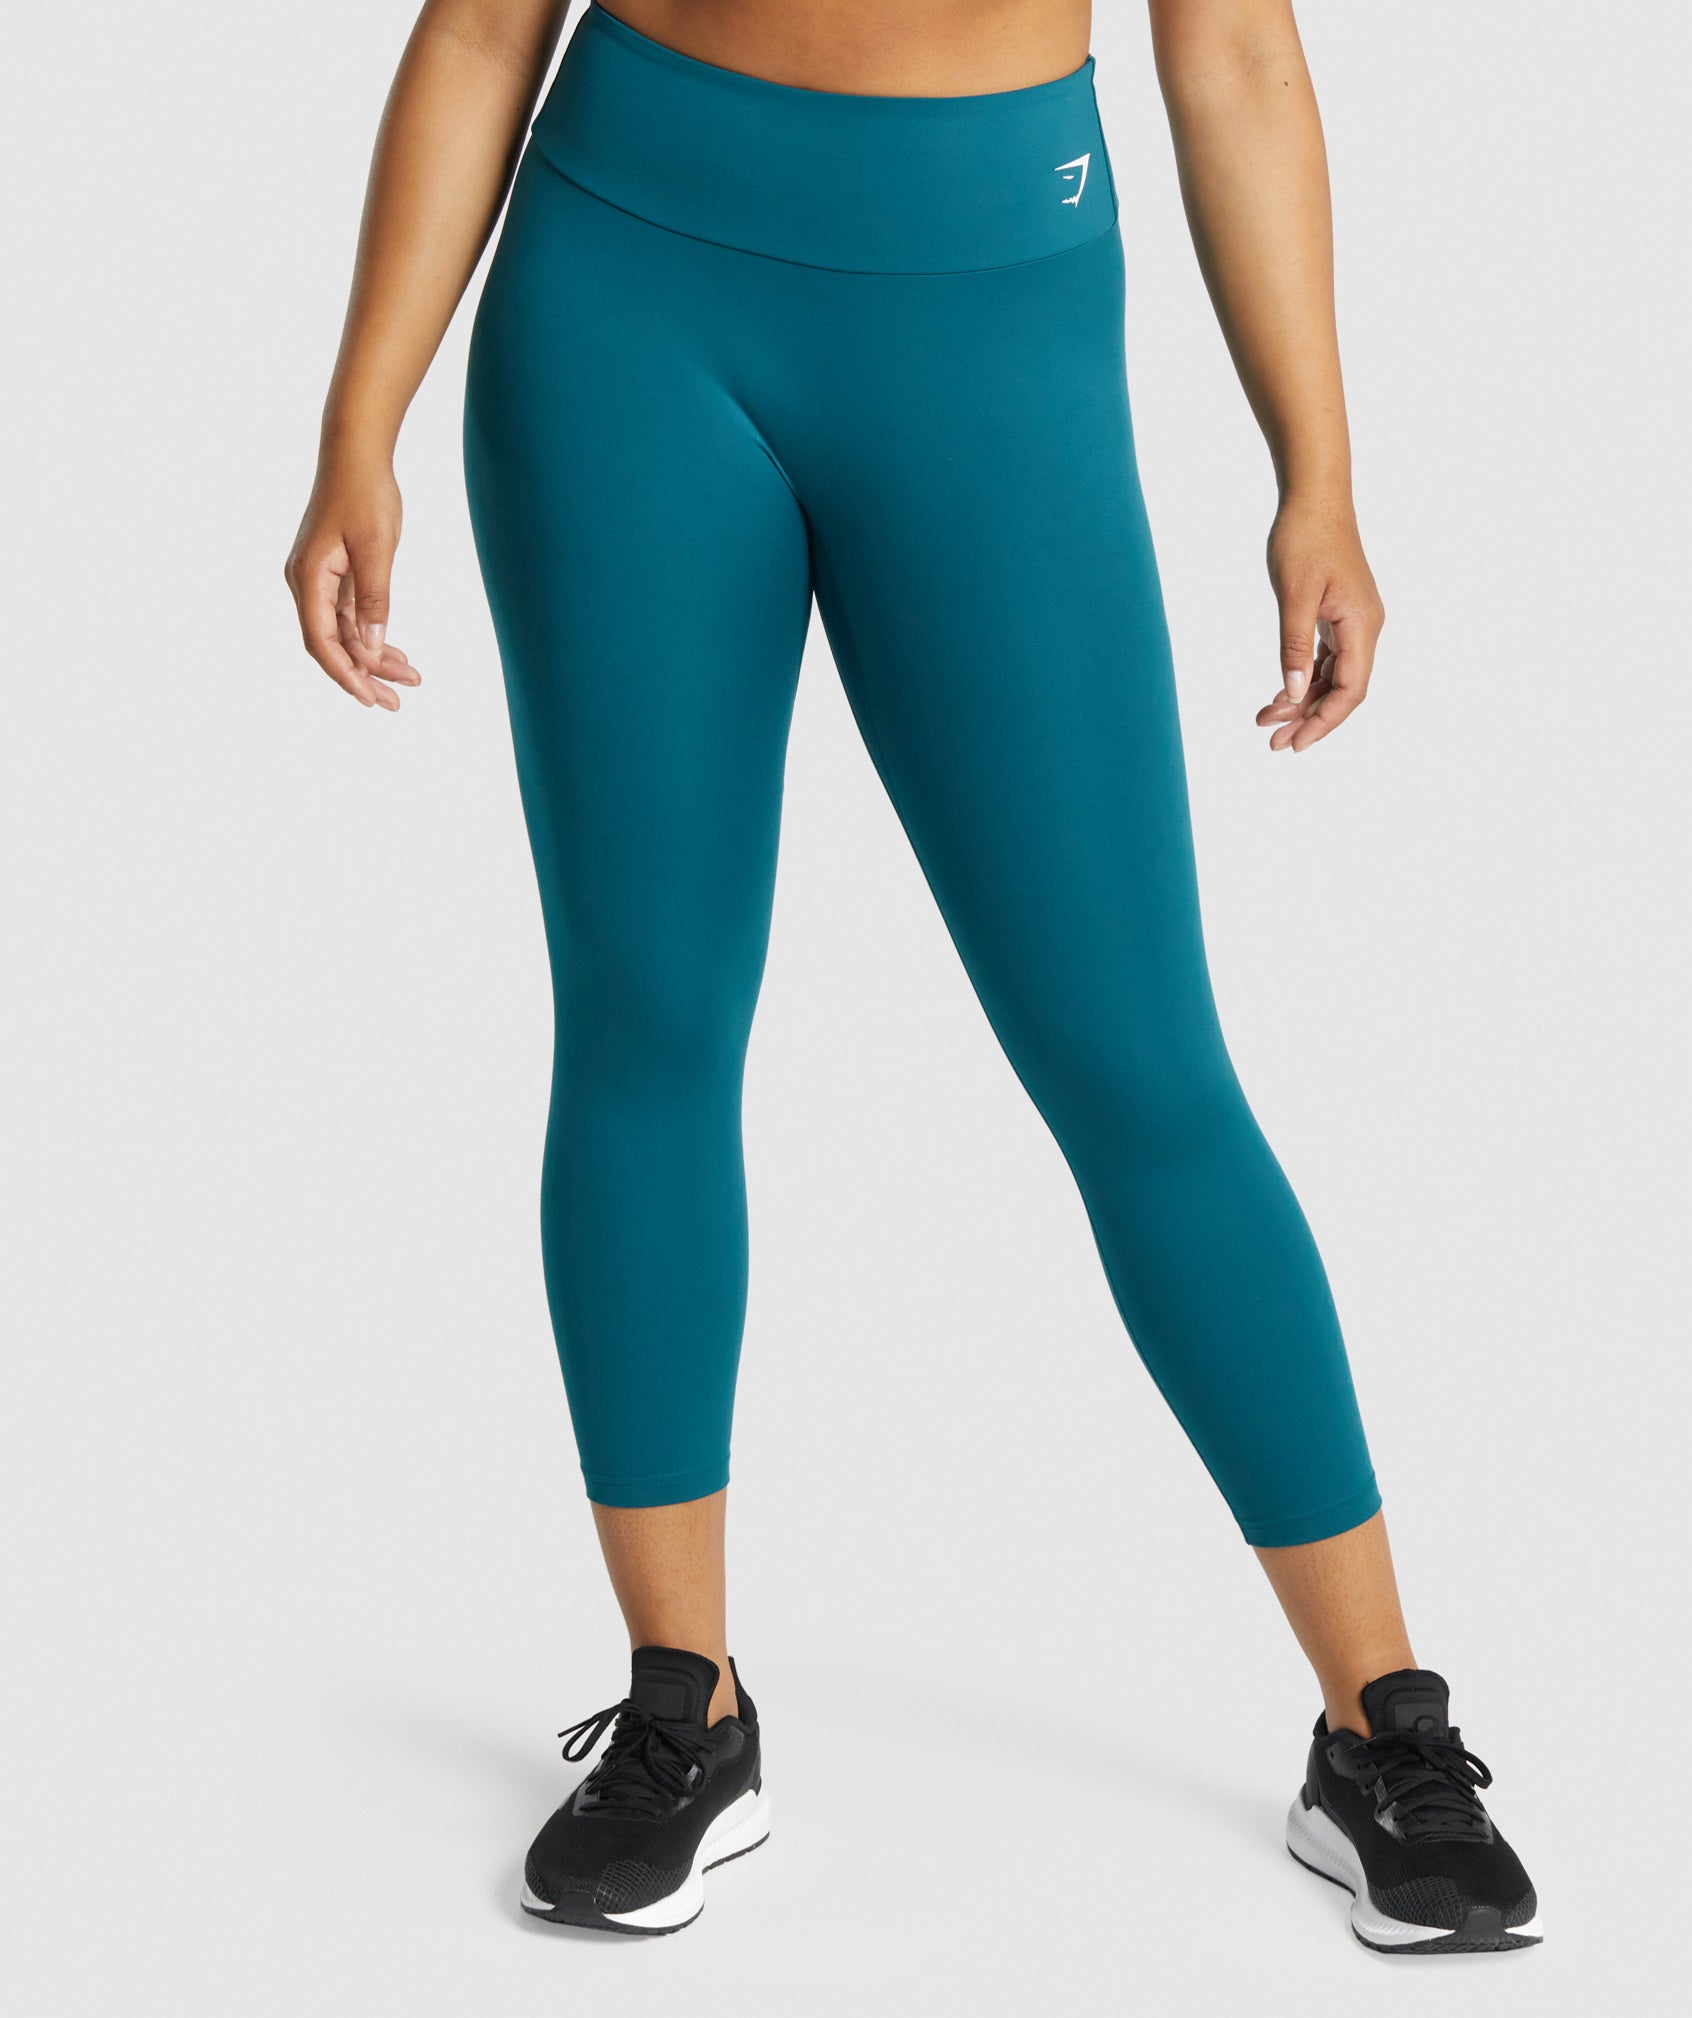 Fitness Women's Cropped Capri Leggings ALOHA E-store  -  Polish manufacturer of sportswear for fitness, Crossfit, gym, running.  Quick delivery and easy return and exchange